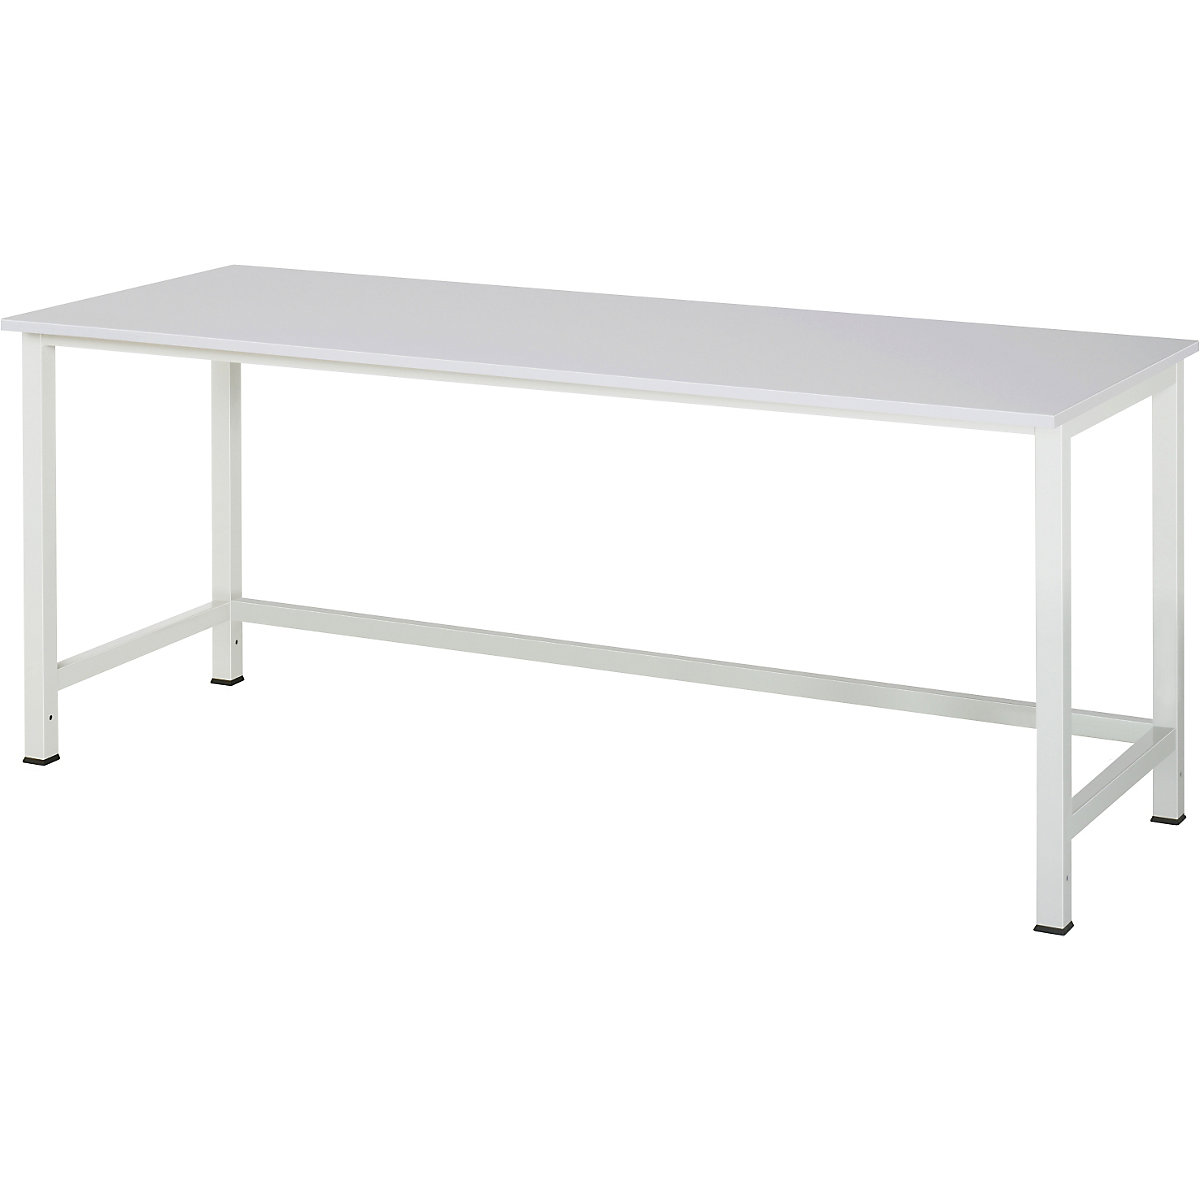 Work table for Series 900 workplace system – RAU, melamine coated, width 2000 mm-7